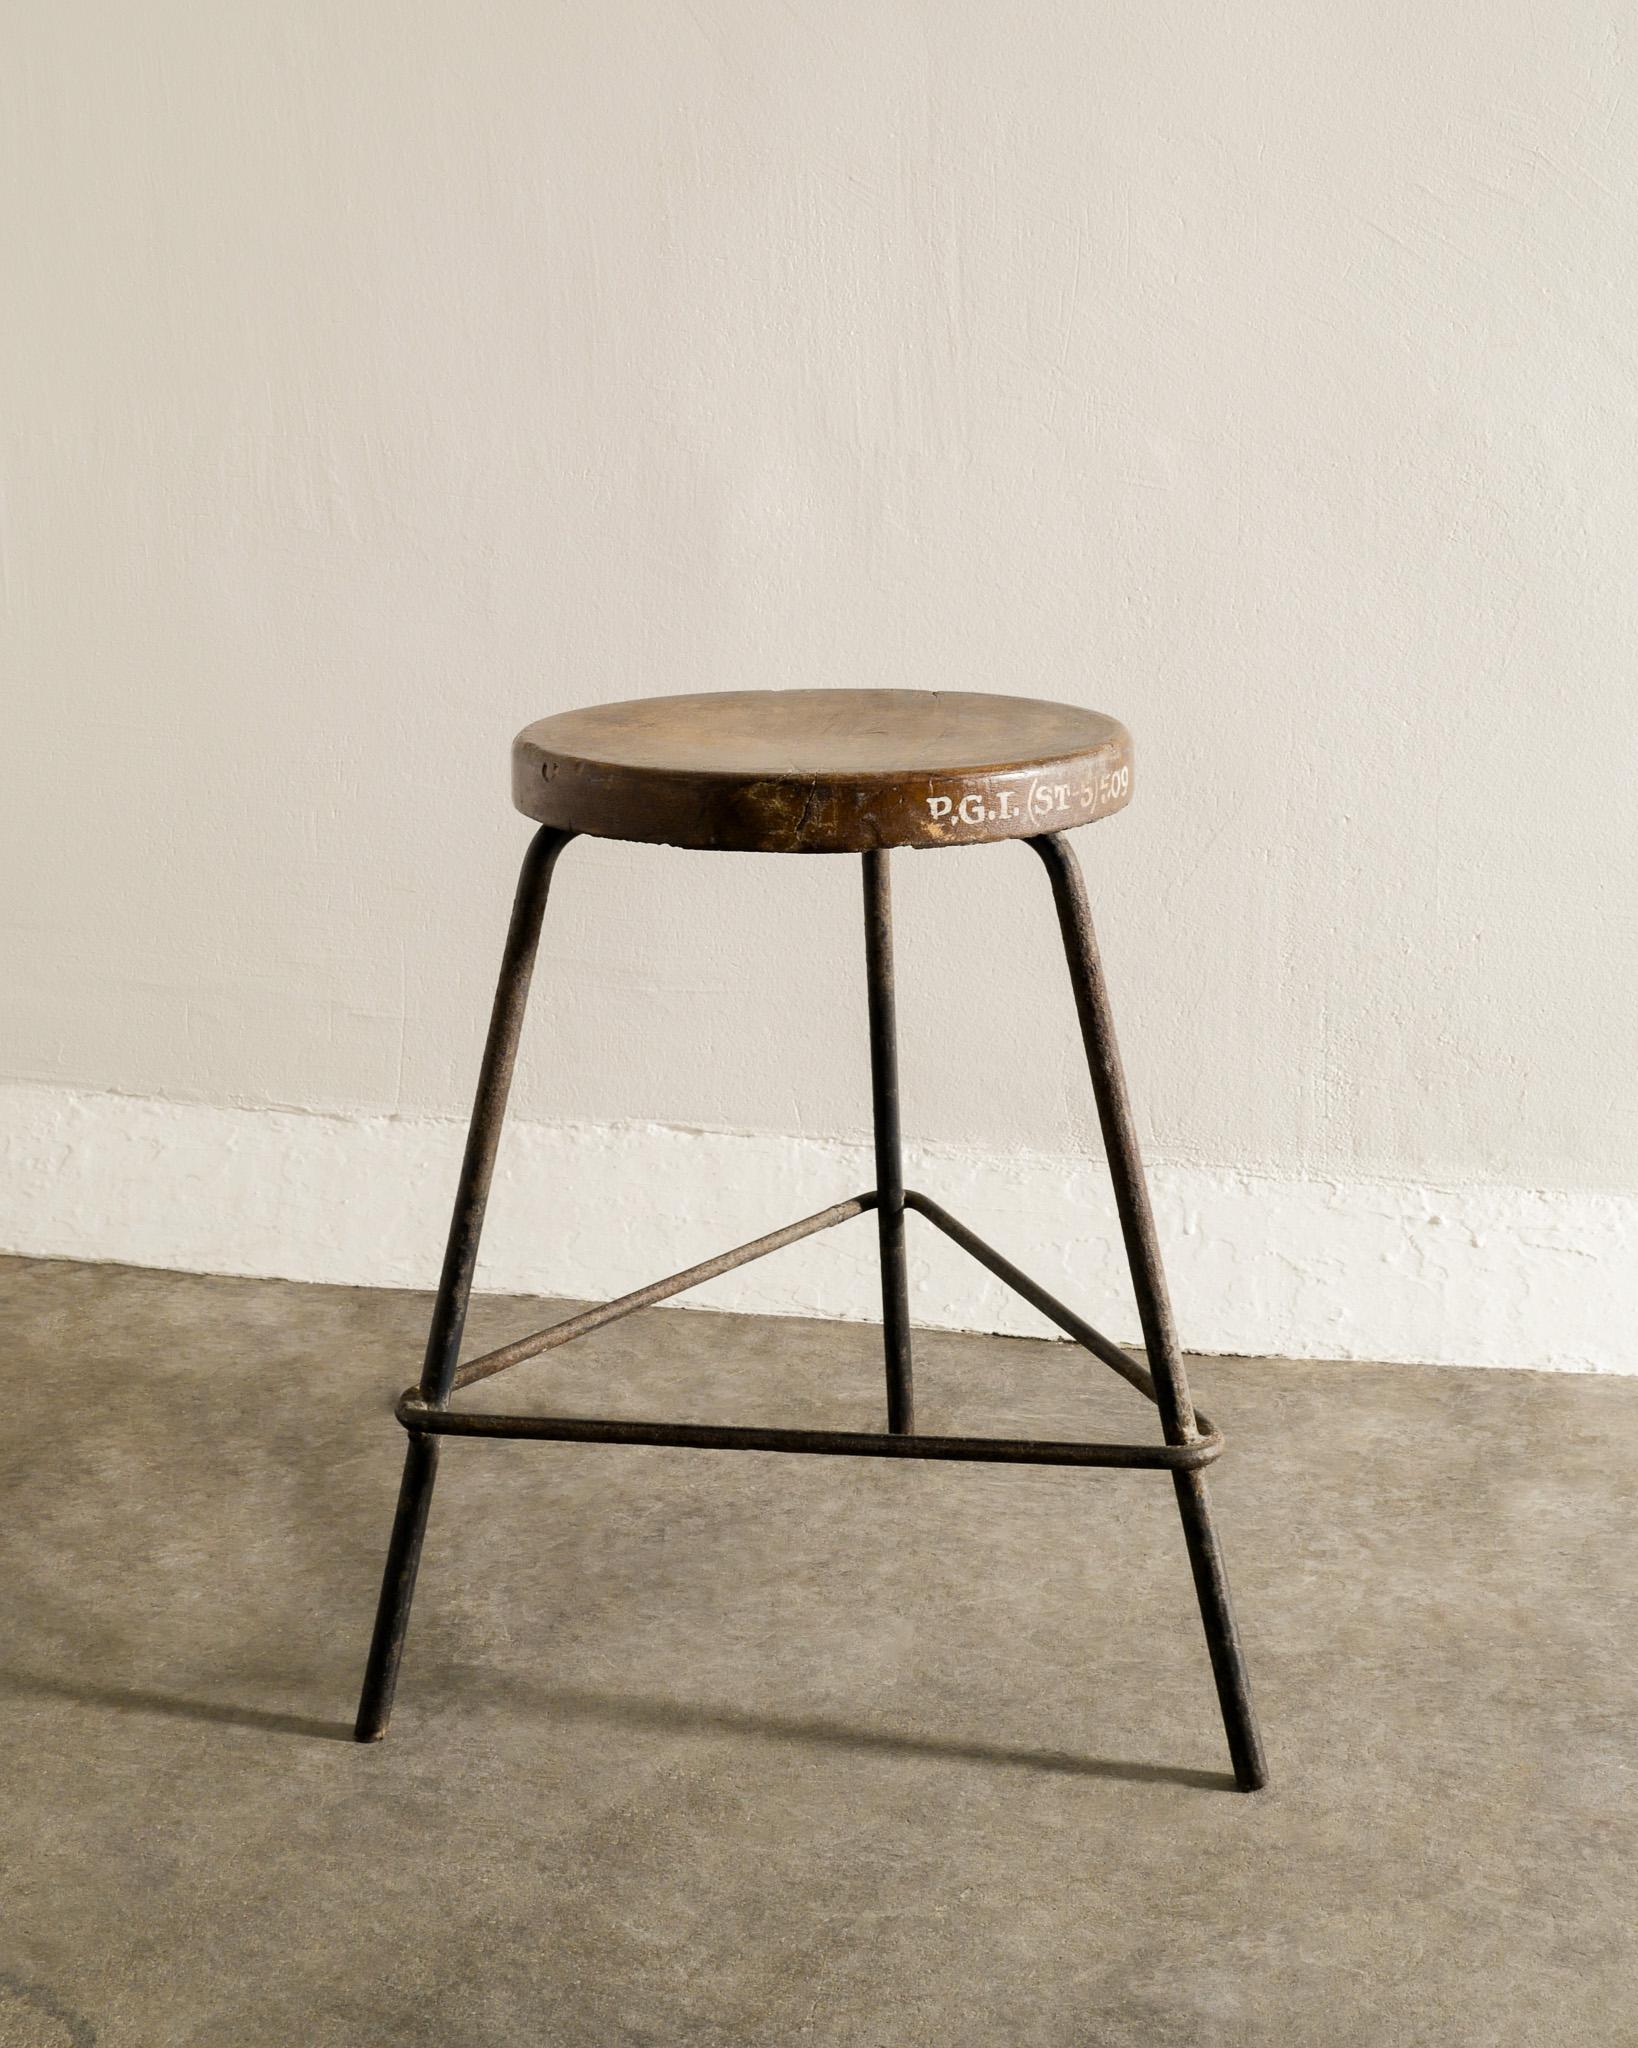 Rare mid century low / bar stool in teak and iron by Pierre Jeanneret produced for Chandigarh, India 1950s. In good original condition with a nice lettering on the side of the seat. 

Dimensions: H: 48 cm / 18.90